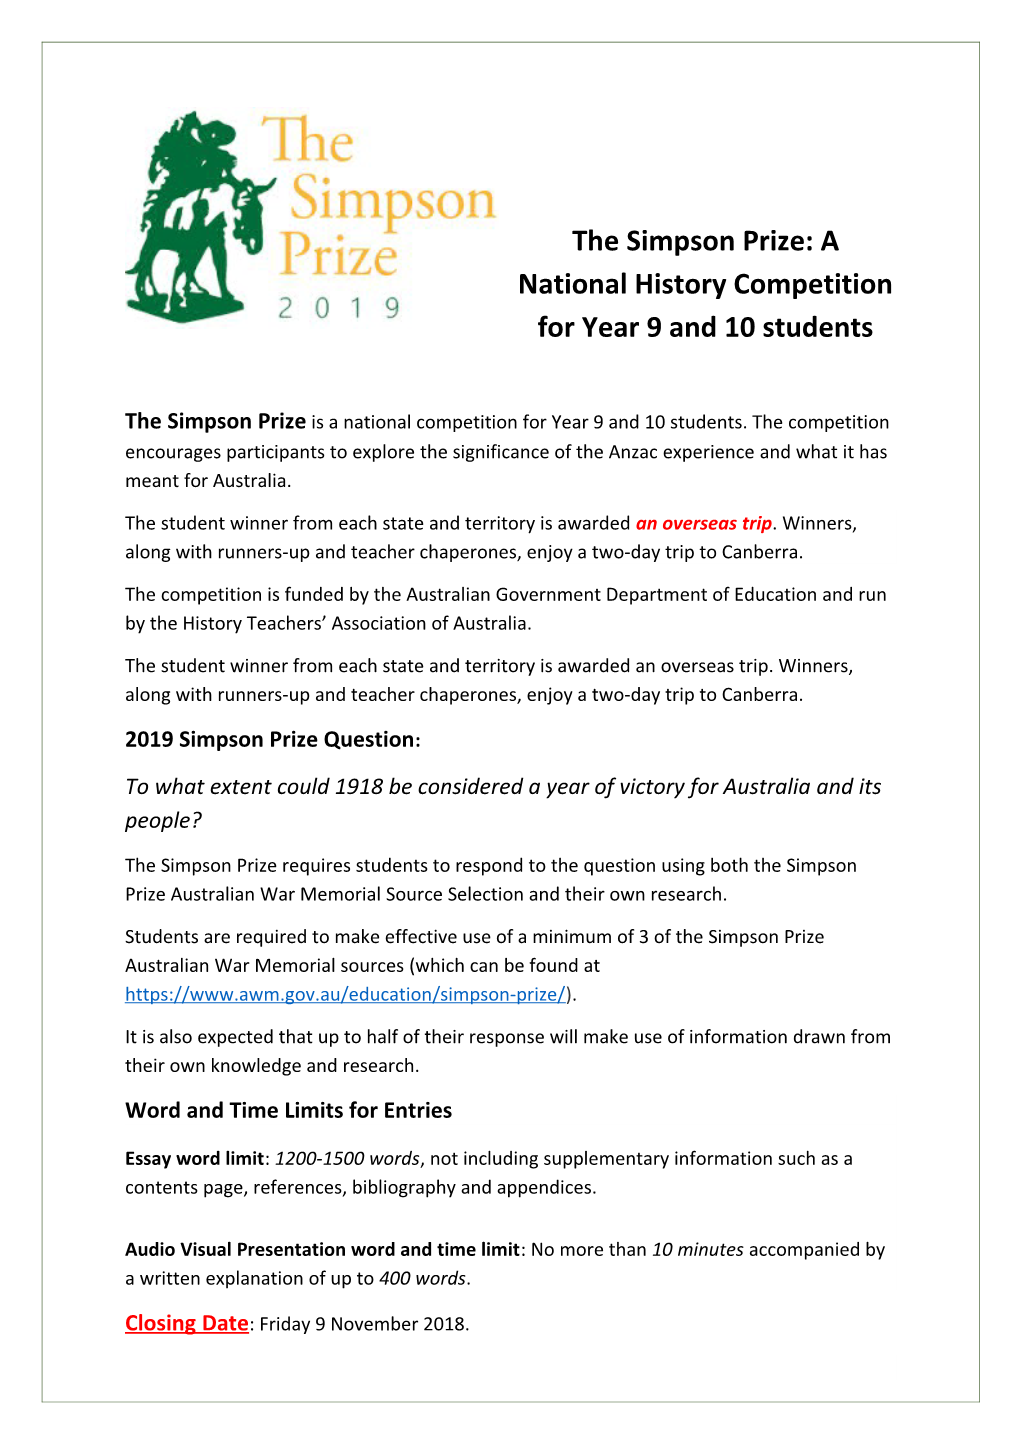 The Simpson Prize: a National History Competition for Year 9 and 10 Students